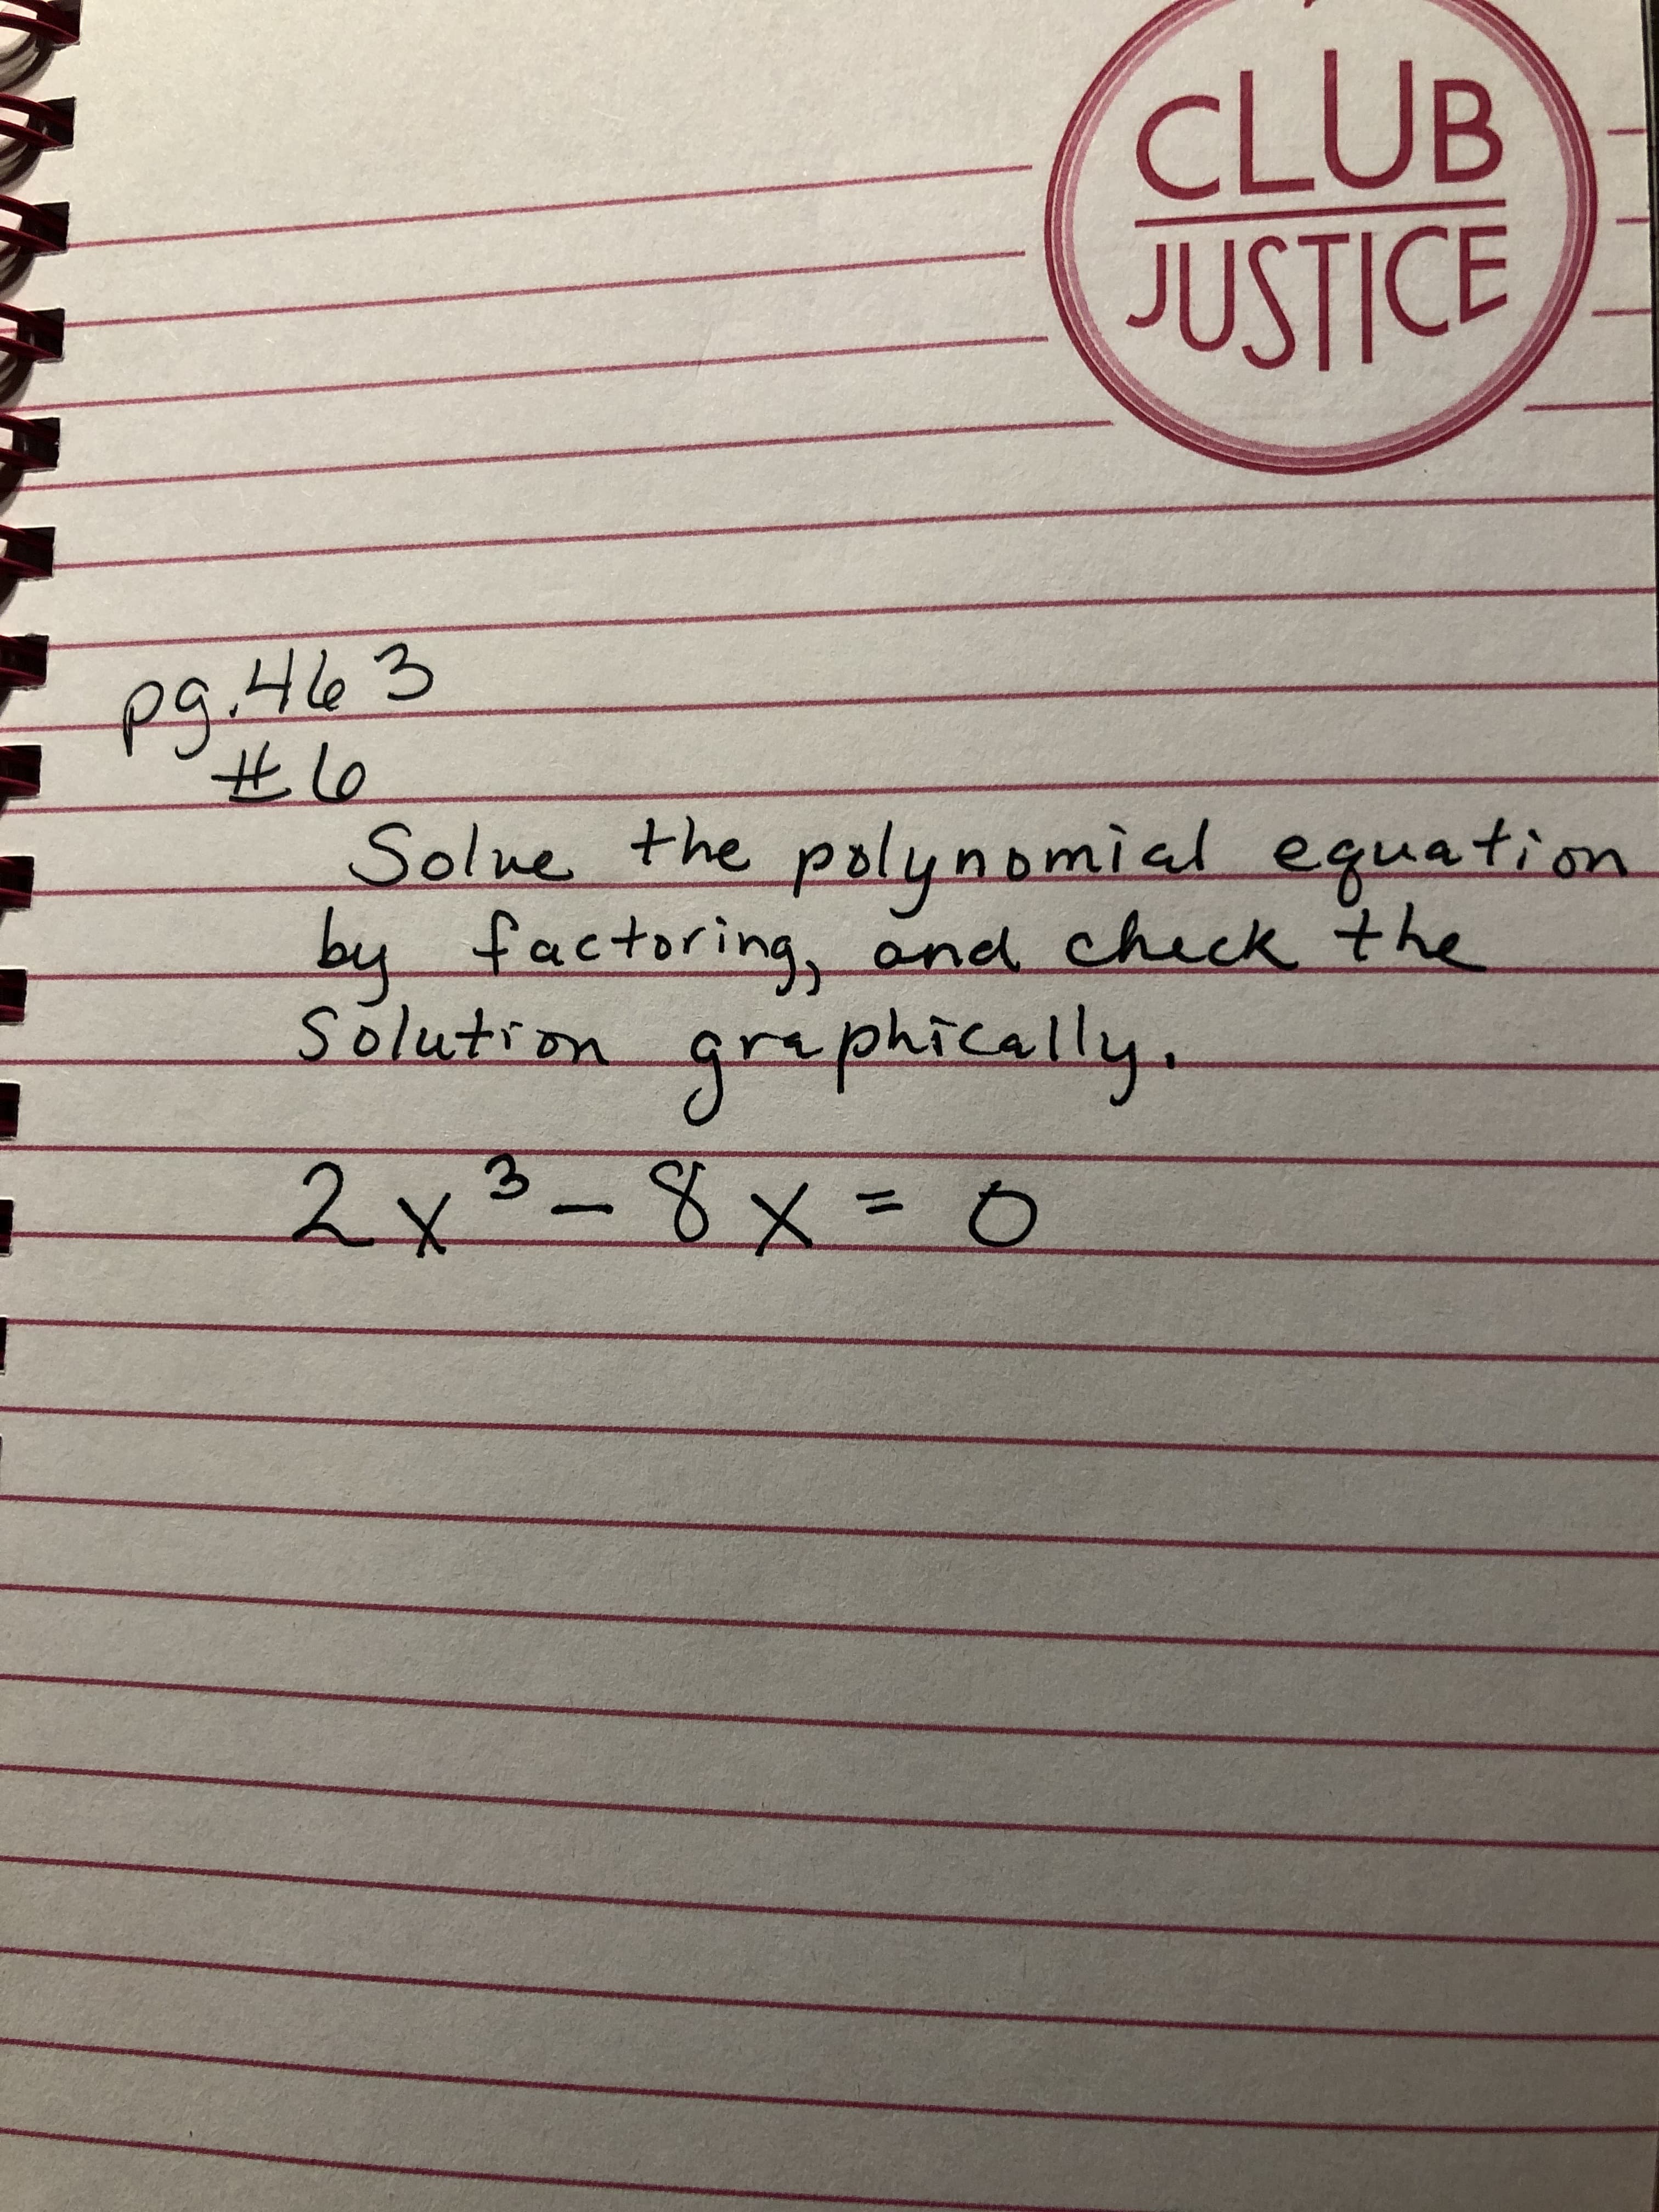 CLUB
JUSTICE
pg.463
出le
Solne the polynomial equatiion
by factoring, and check the
solution
equation
grephically.
2x3-8x= 0
